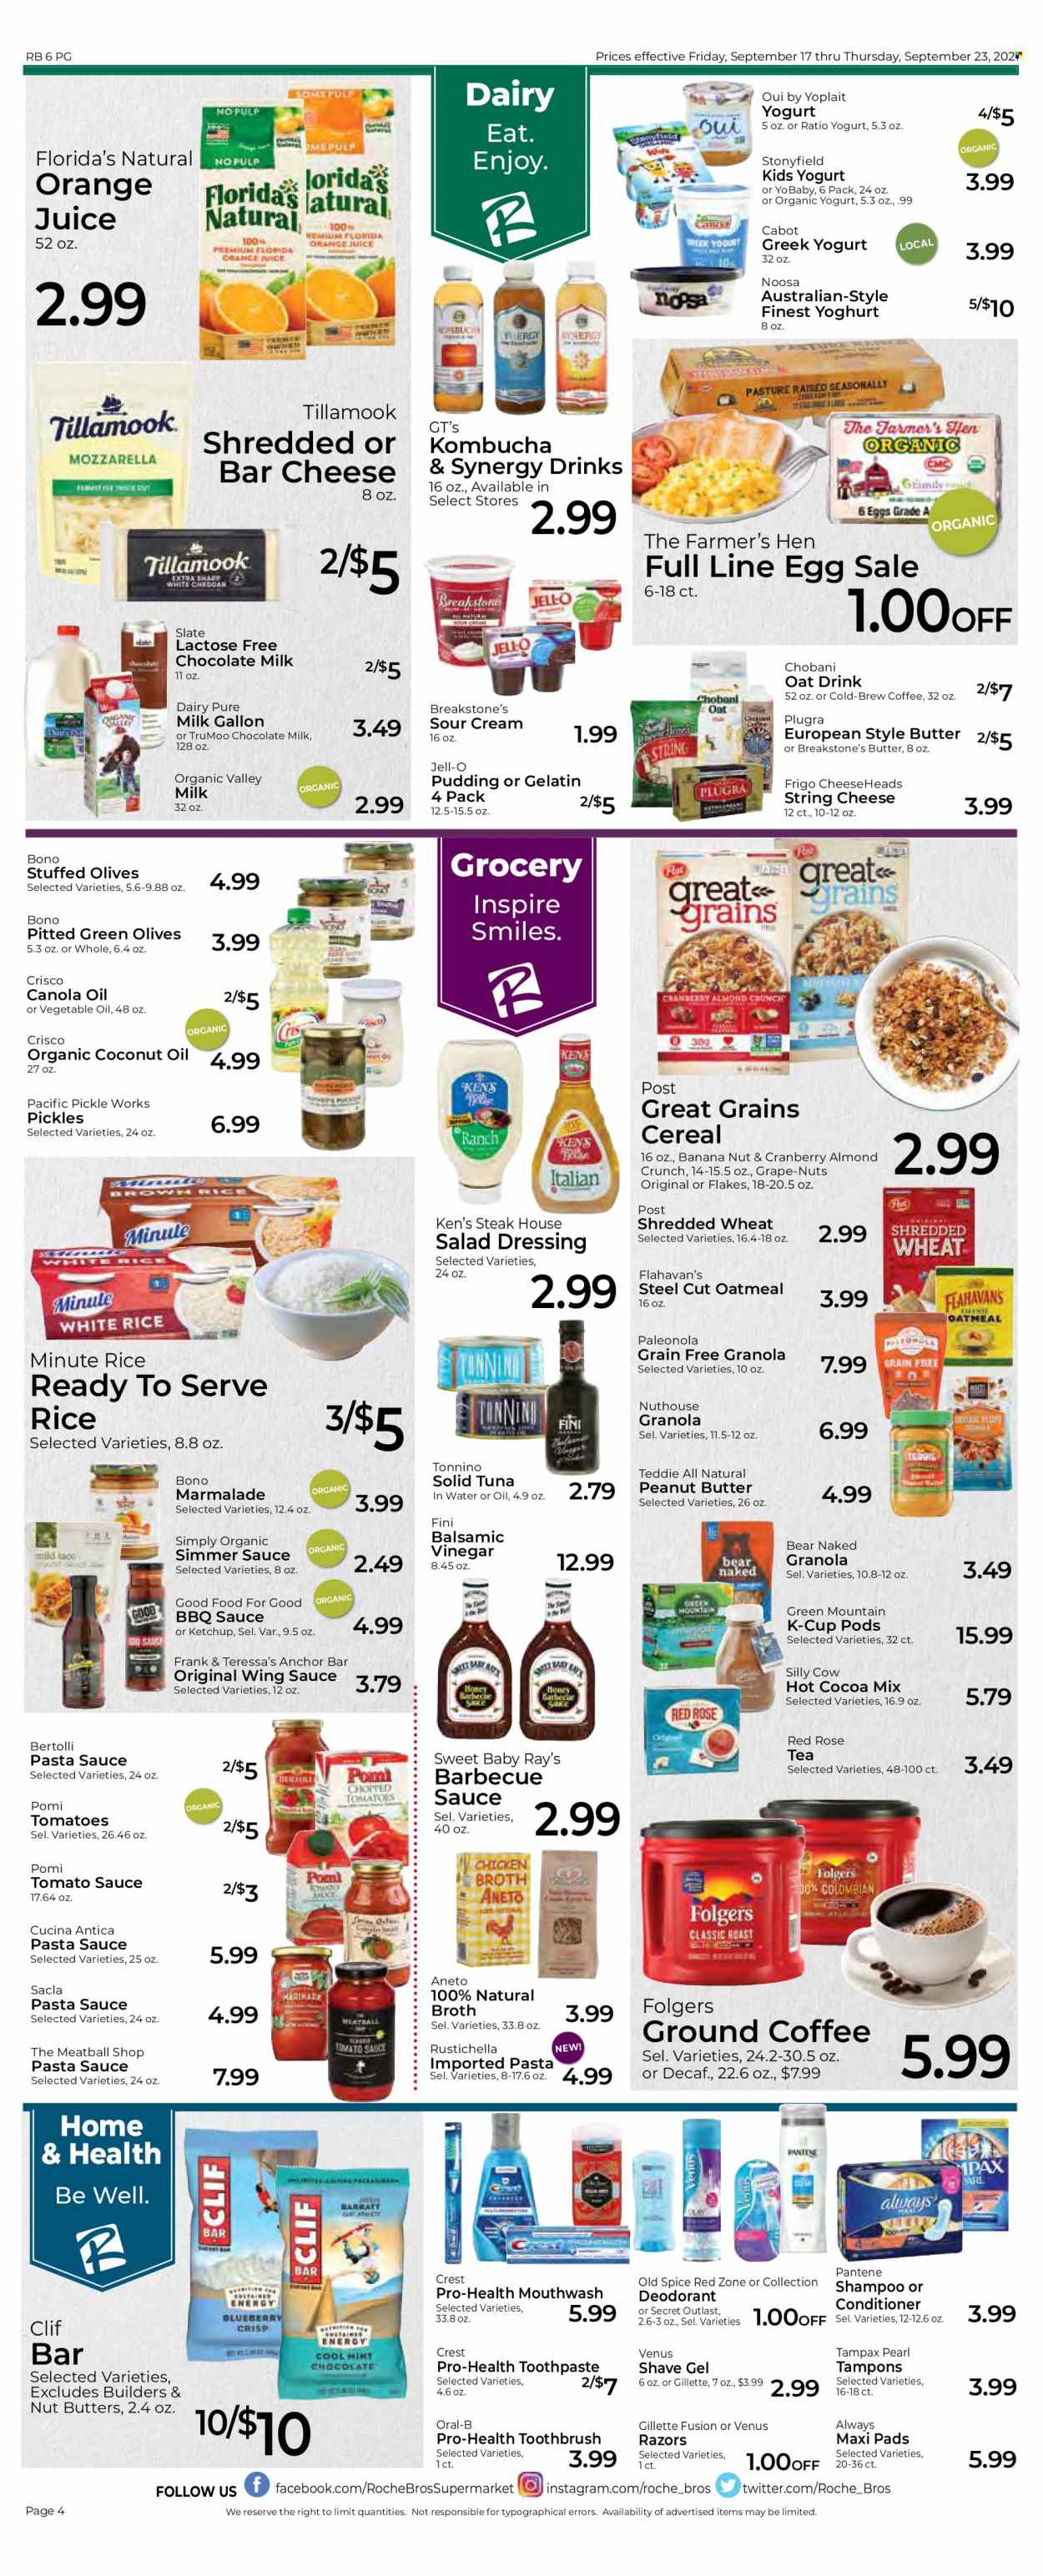 thumbnail - Roche Bros. Flyer - 09/17/2021 - 09/23/2021 - Sales products - tuna, pasta sauce, sauce, Bertolli, string cheese, greek yoghurt, pudding, yoghurt, organic yoghurt, Yoplait, Chobani, organic milk, eggs, Anchor, sour cream, milk chocolate, chocolate, Florida's Natural, Crisco, oatmeal, Jell-O, broth, tomato sauce, pickles, olives, cereals, granola, rice, spice, BBQ sauce, salad dressing, ketchup, dressing, wing sauce, balsamic vinegar, canola oil, coconut oil, vinegar, peanut butter, orange juice, juice, kombucha, hot cocoa, tea, coffee, Folgers, ground coffee, coffee capsules, K-Cups, Green Mountain, rosé wine, steak, shampoo, Old Spice, toothbrush, Oral-B, toothpaste, mouthwash, Crest, Tampax, sanitary pads, tampons, conditioner, Pantene, anti-perspirant, deodorant, Gillette, shave gel, Venus, rose. Page 4.